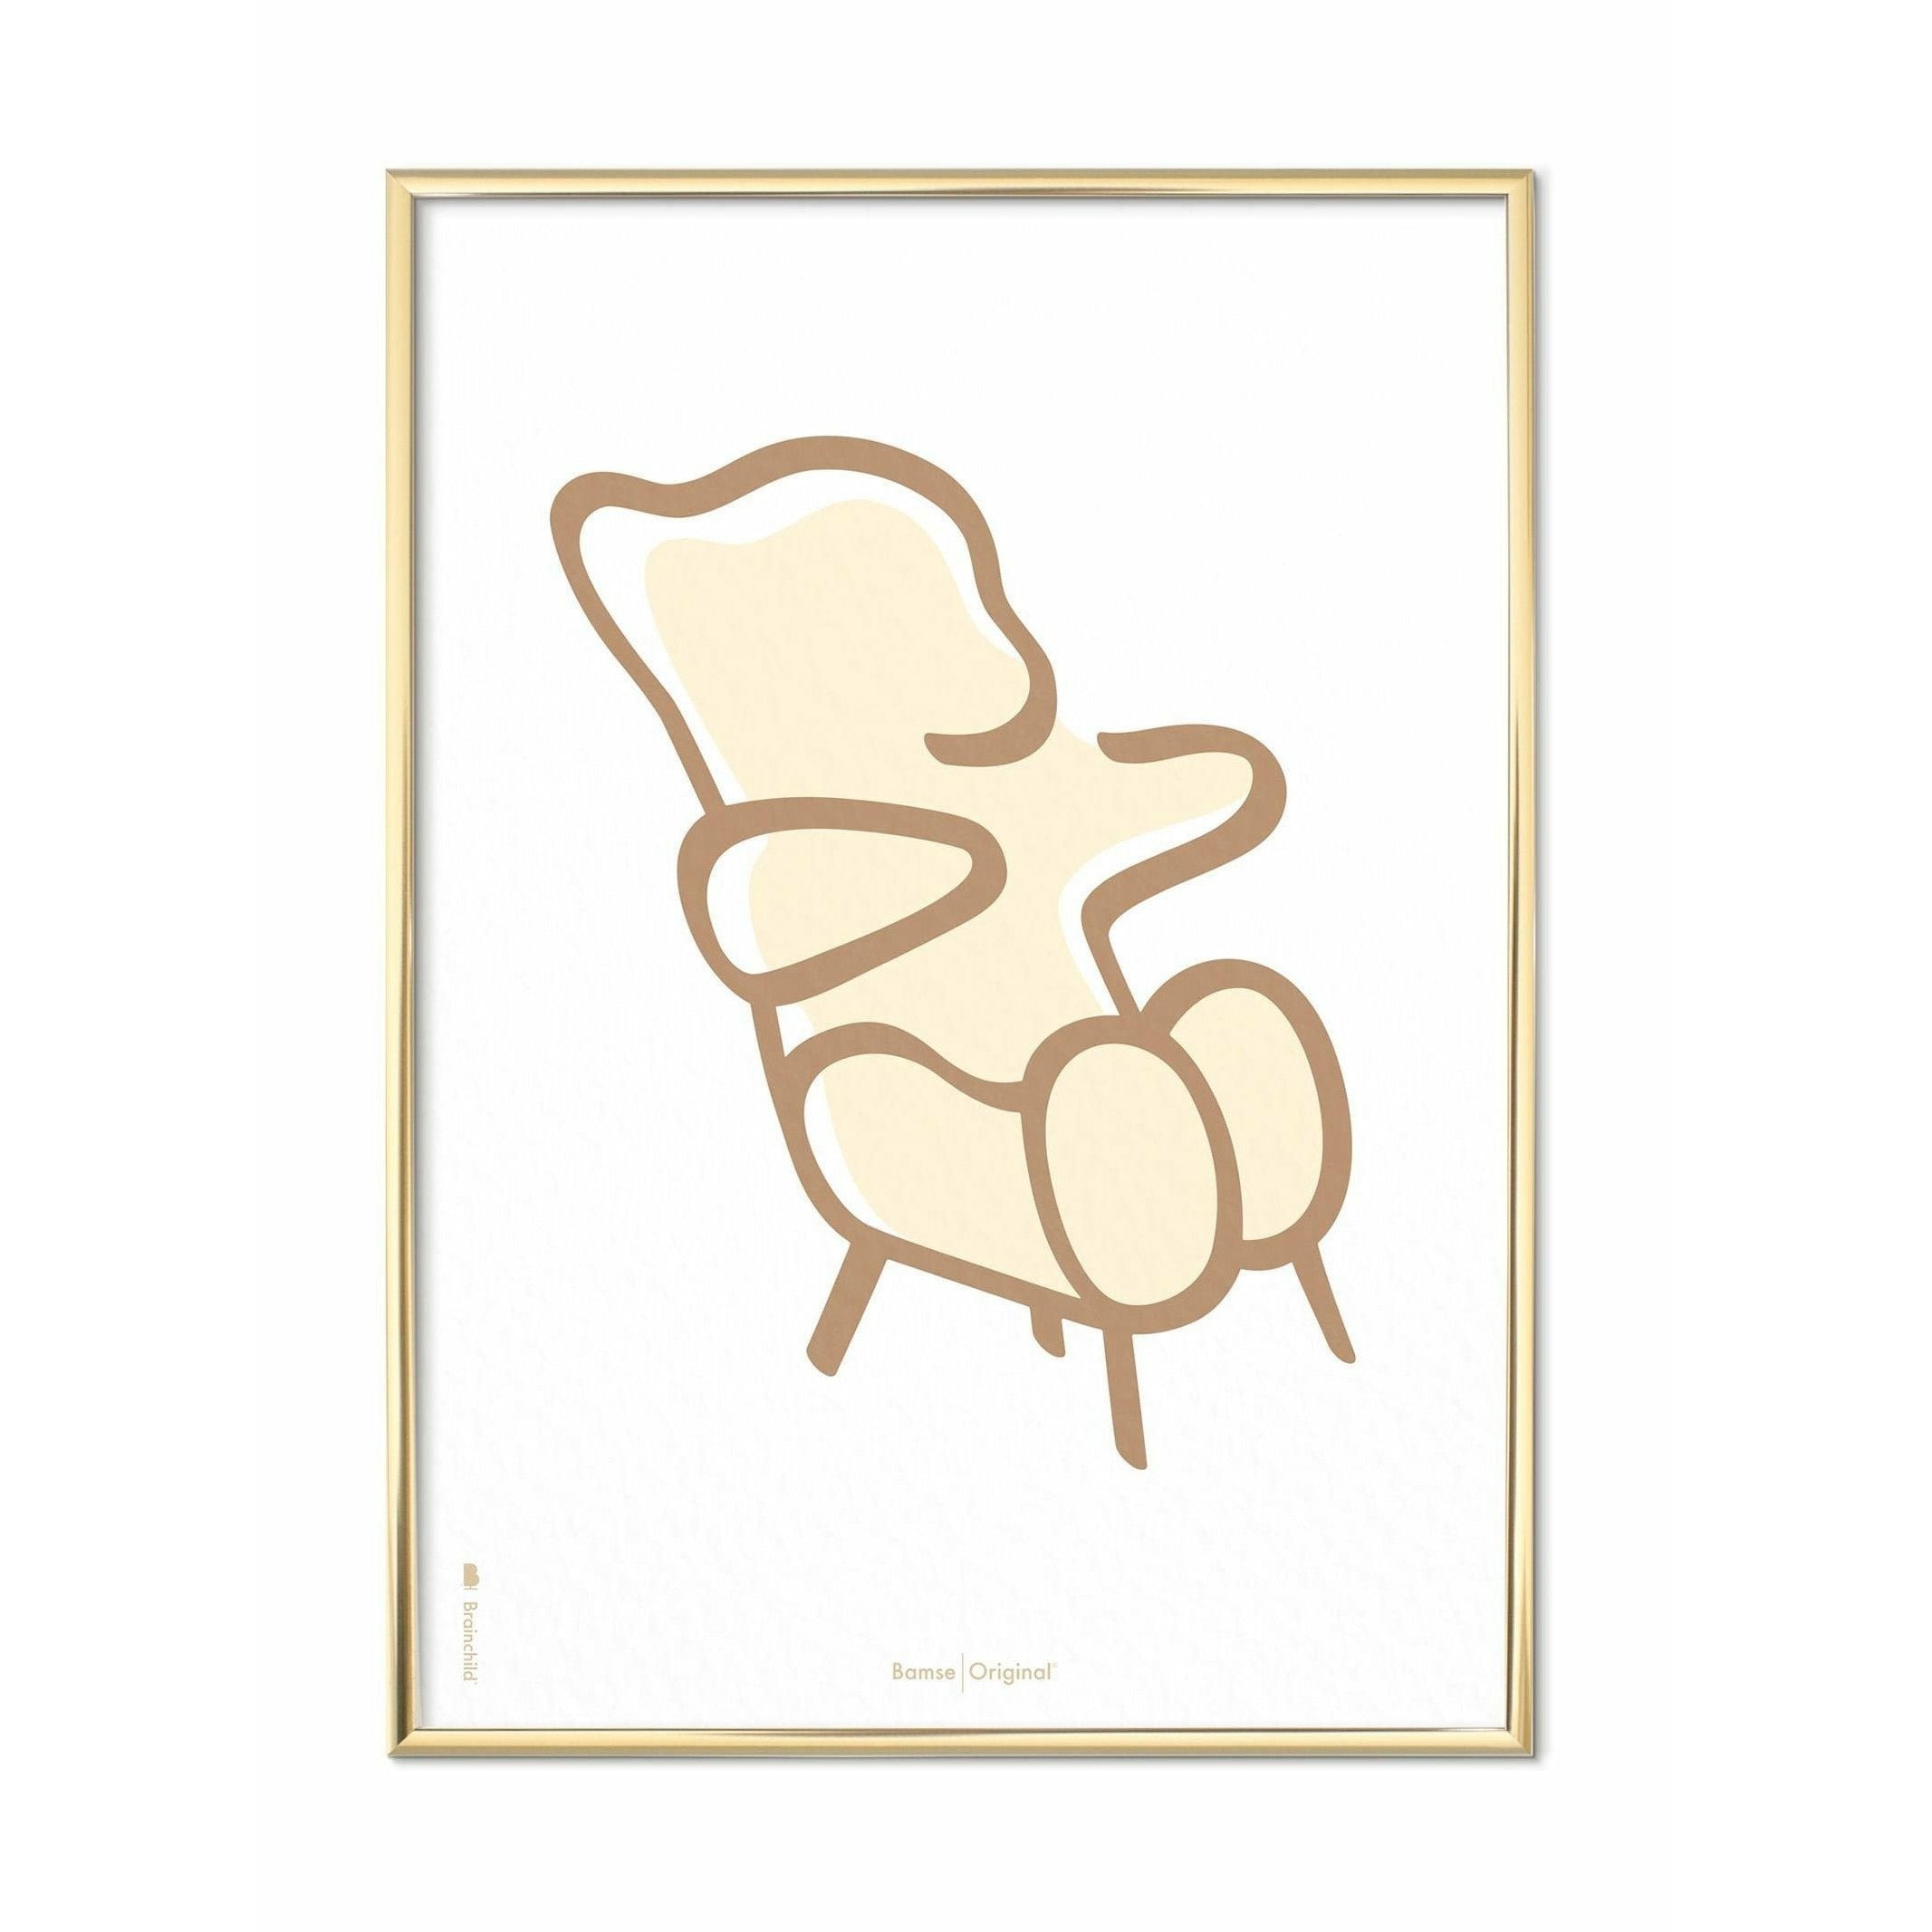 Brainchild Teddy Bear Line Poster, Brass Colored Frame A5, White Background